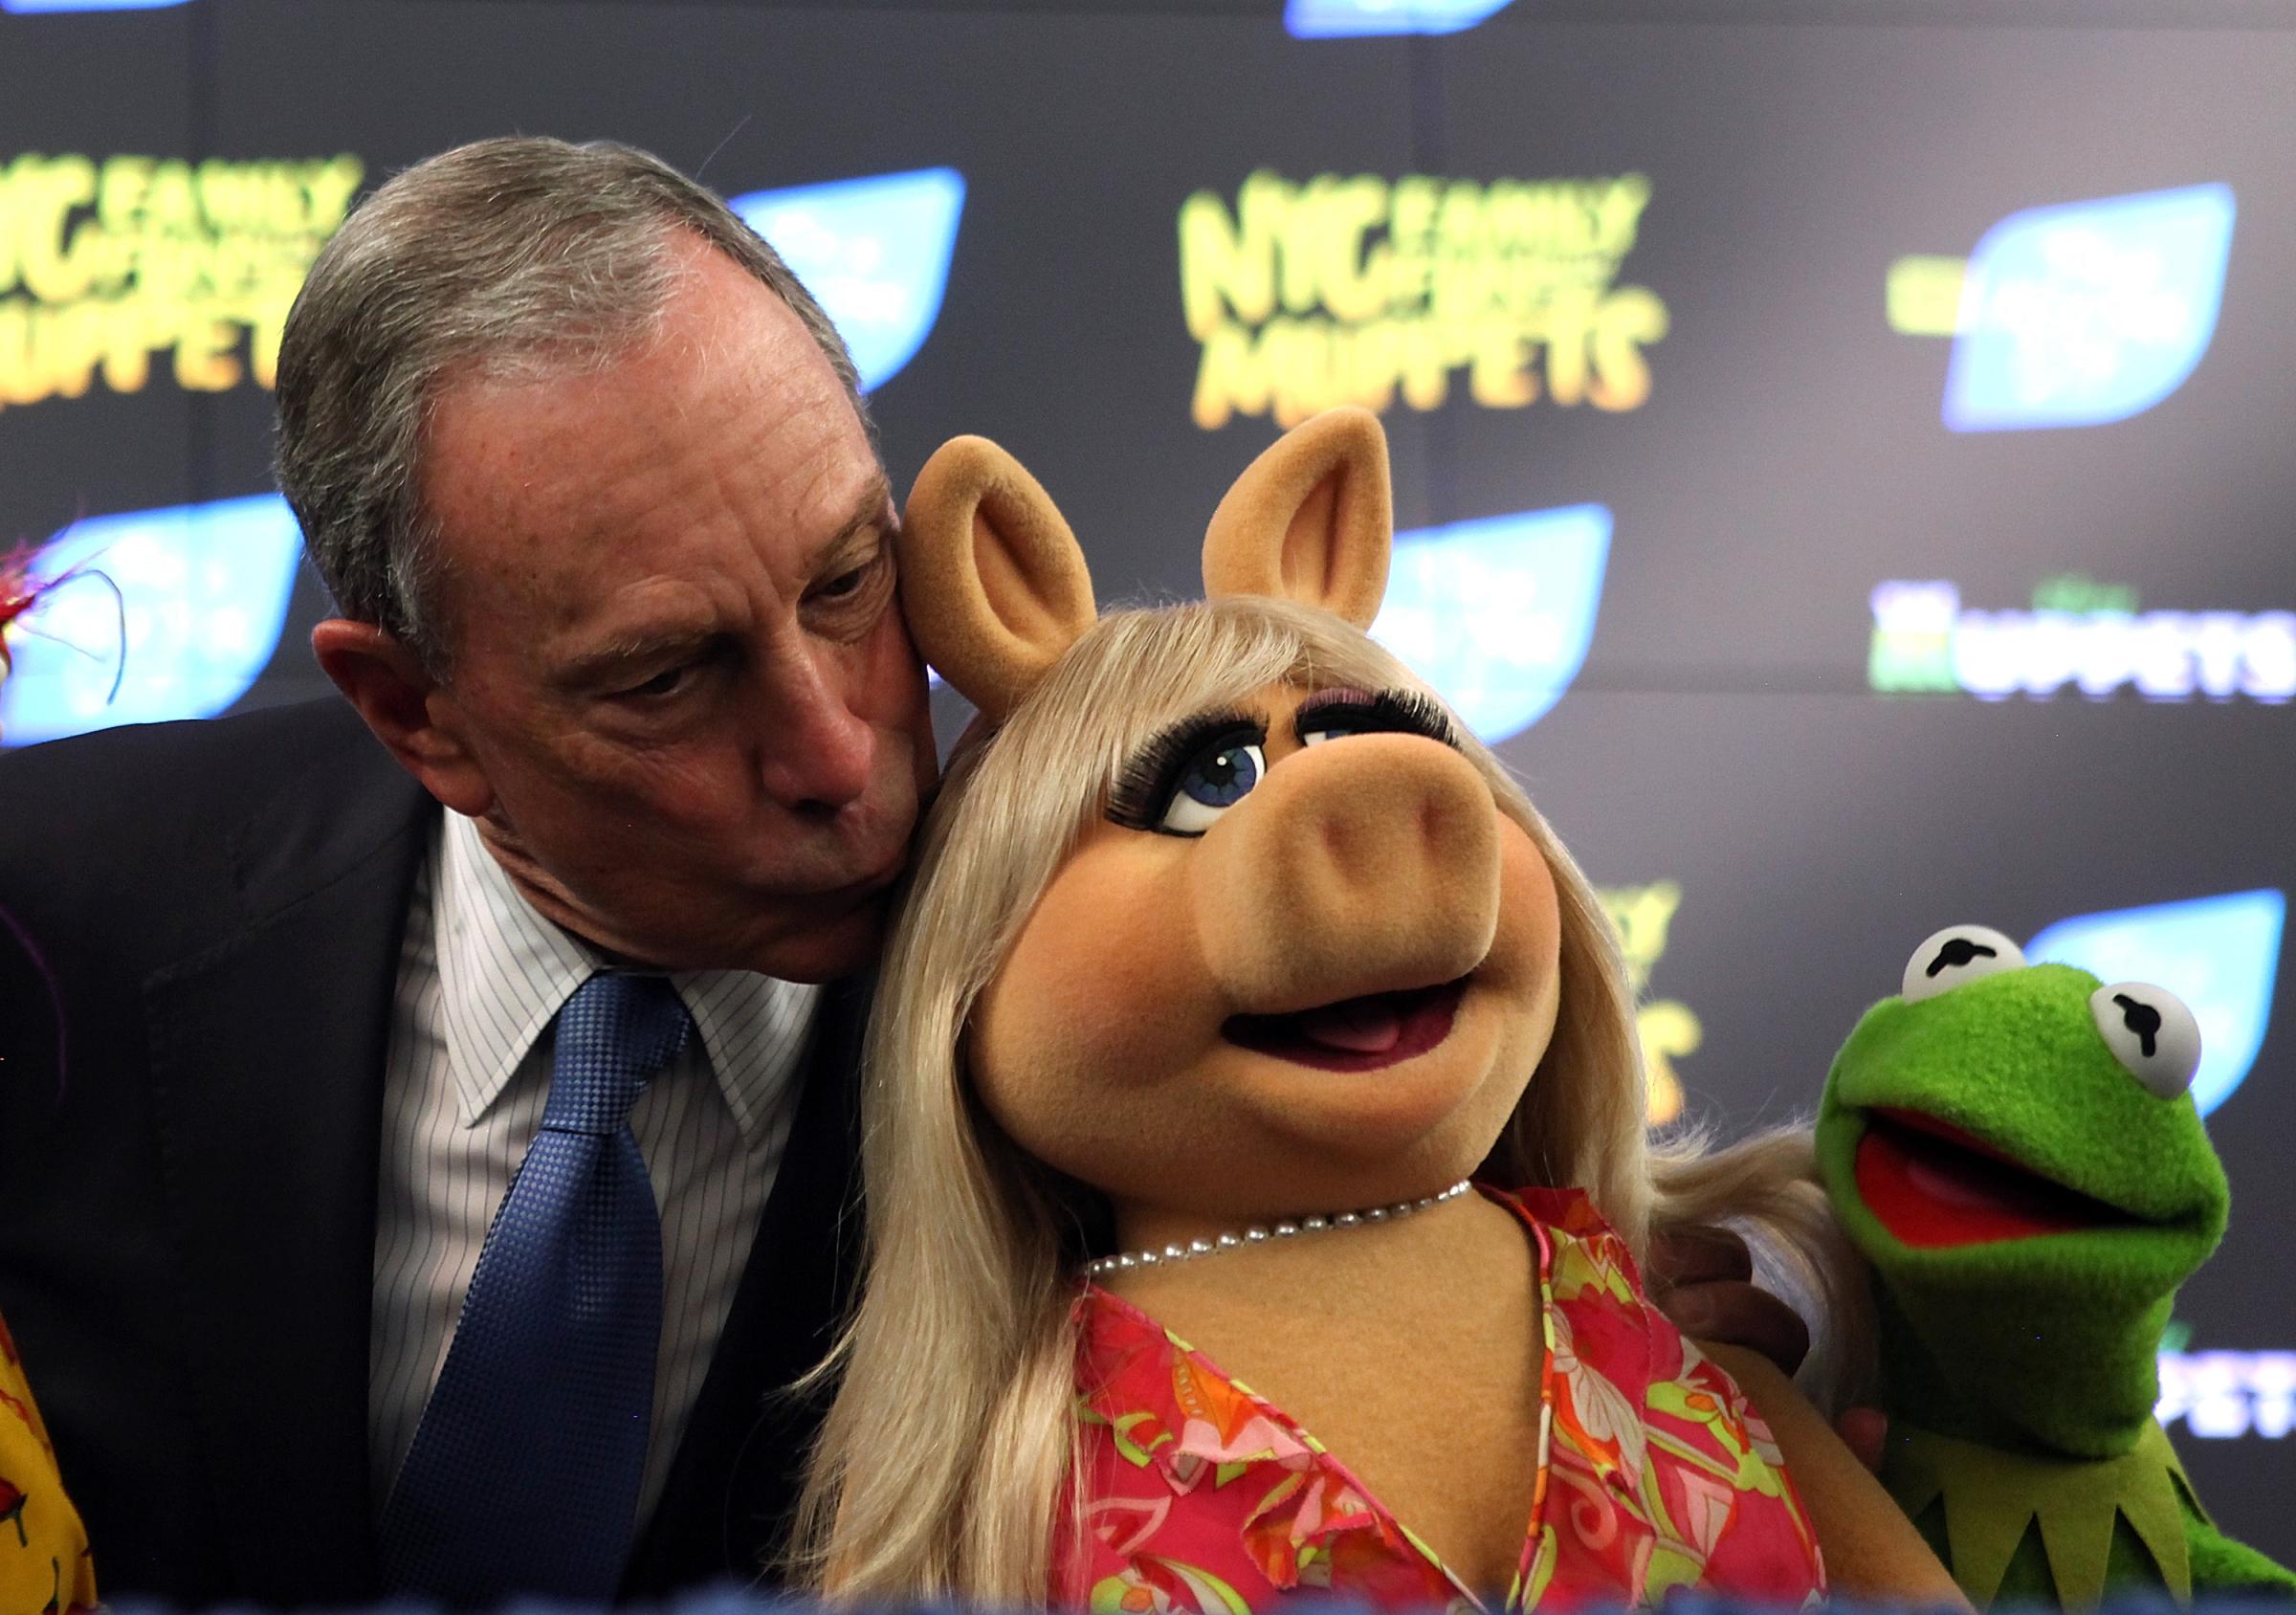 Mayor Bloomberg Appears With The Muppets In Times Square